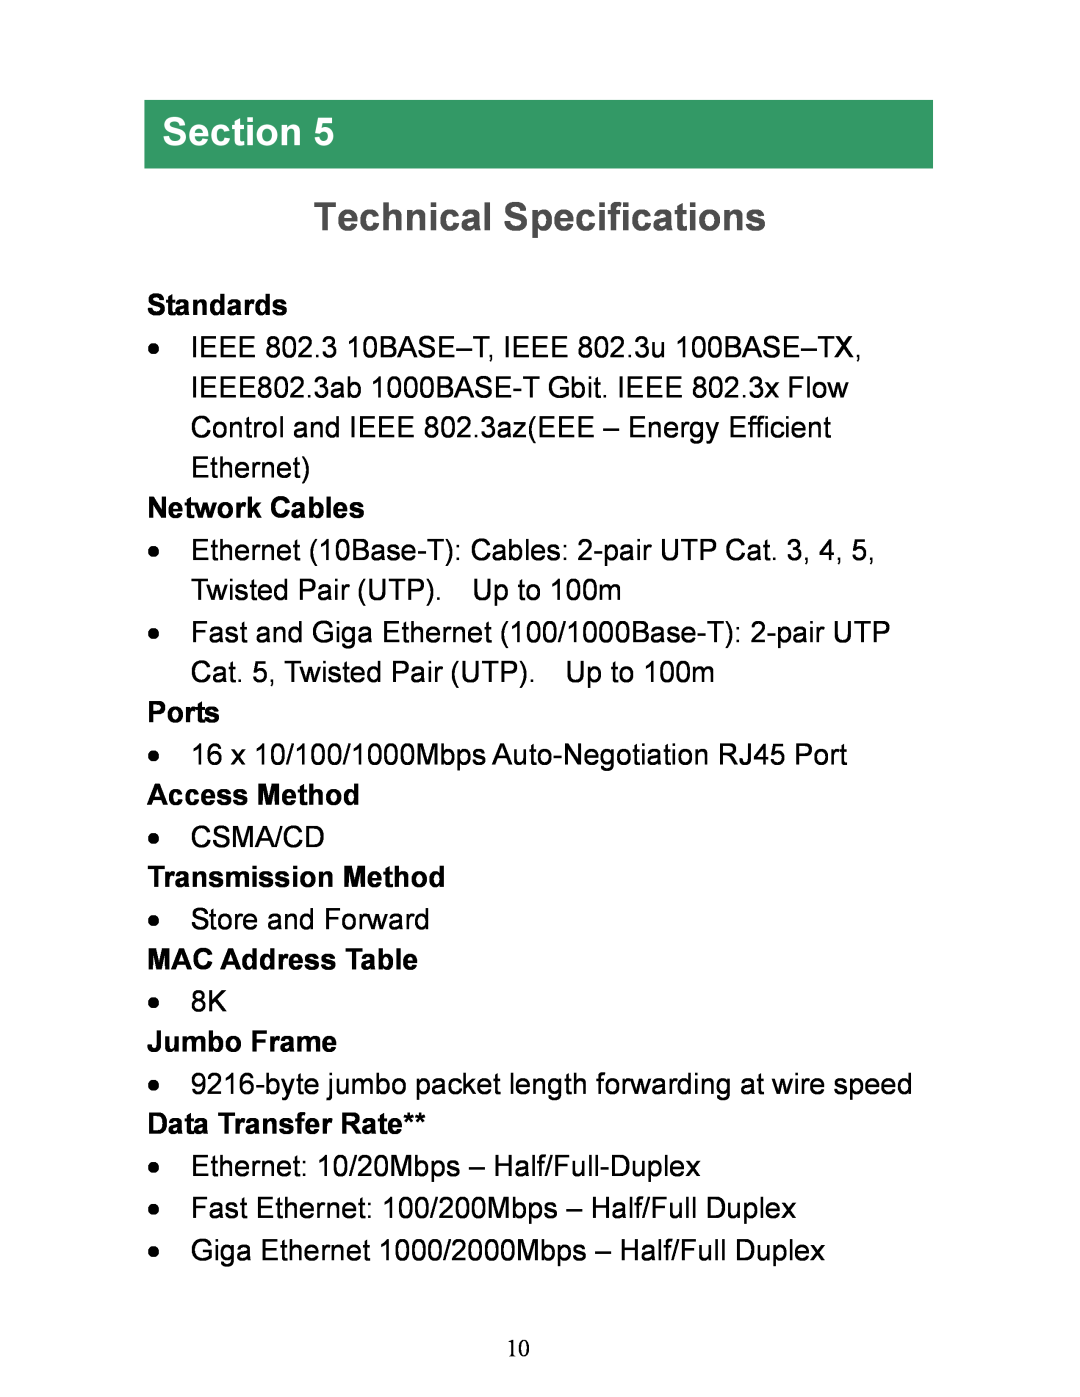 Airlink101 AGSW1600 manual Technical Specifications, Standards, Network Cables, Ports, Access Method, Transmission Method 